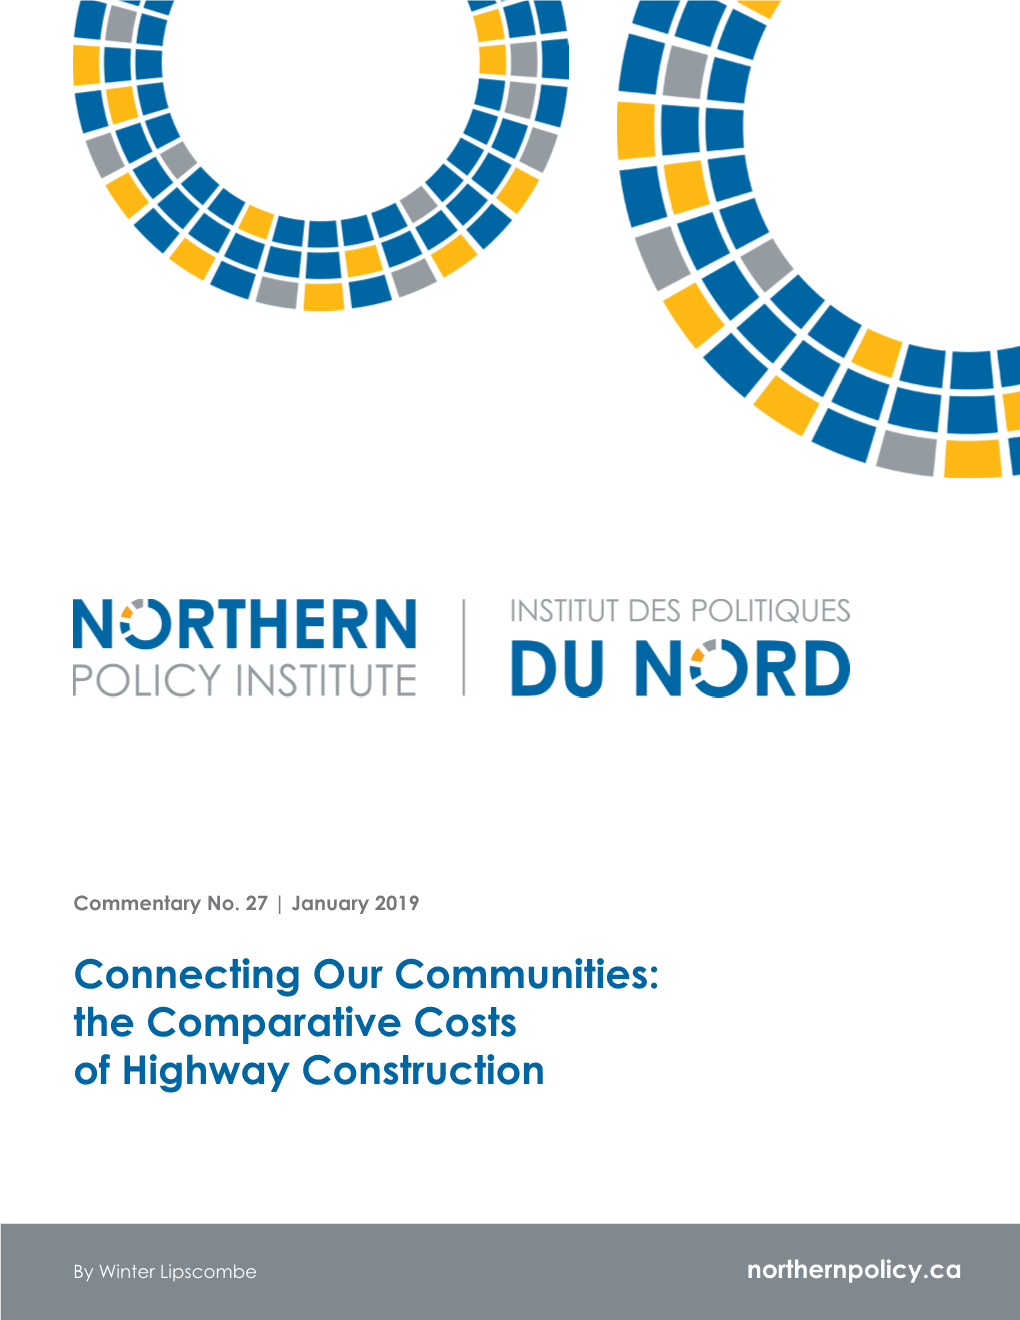 The Comparative Costs of Highway Construction